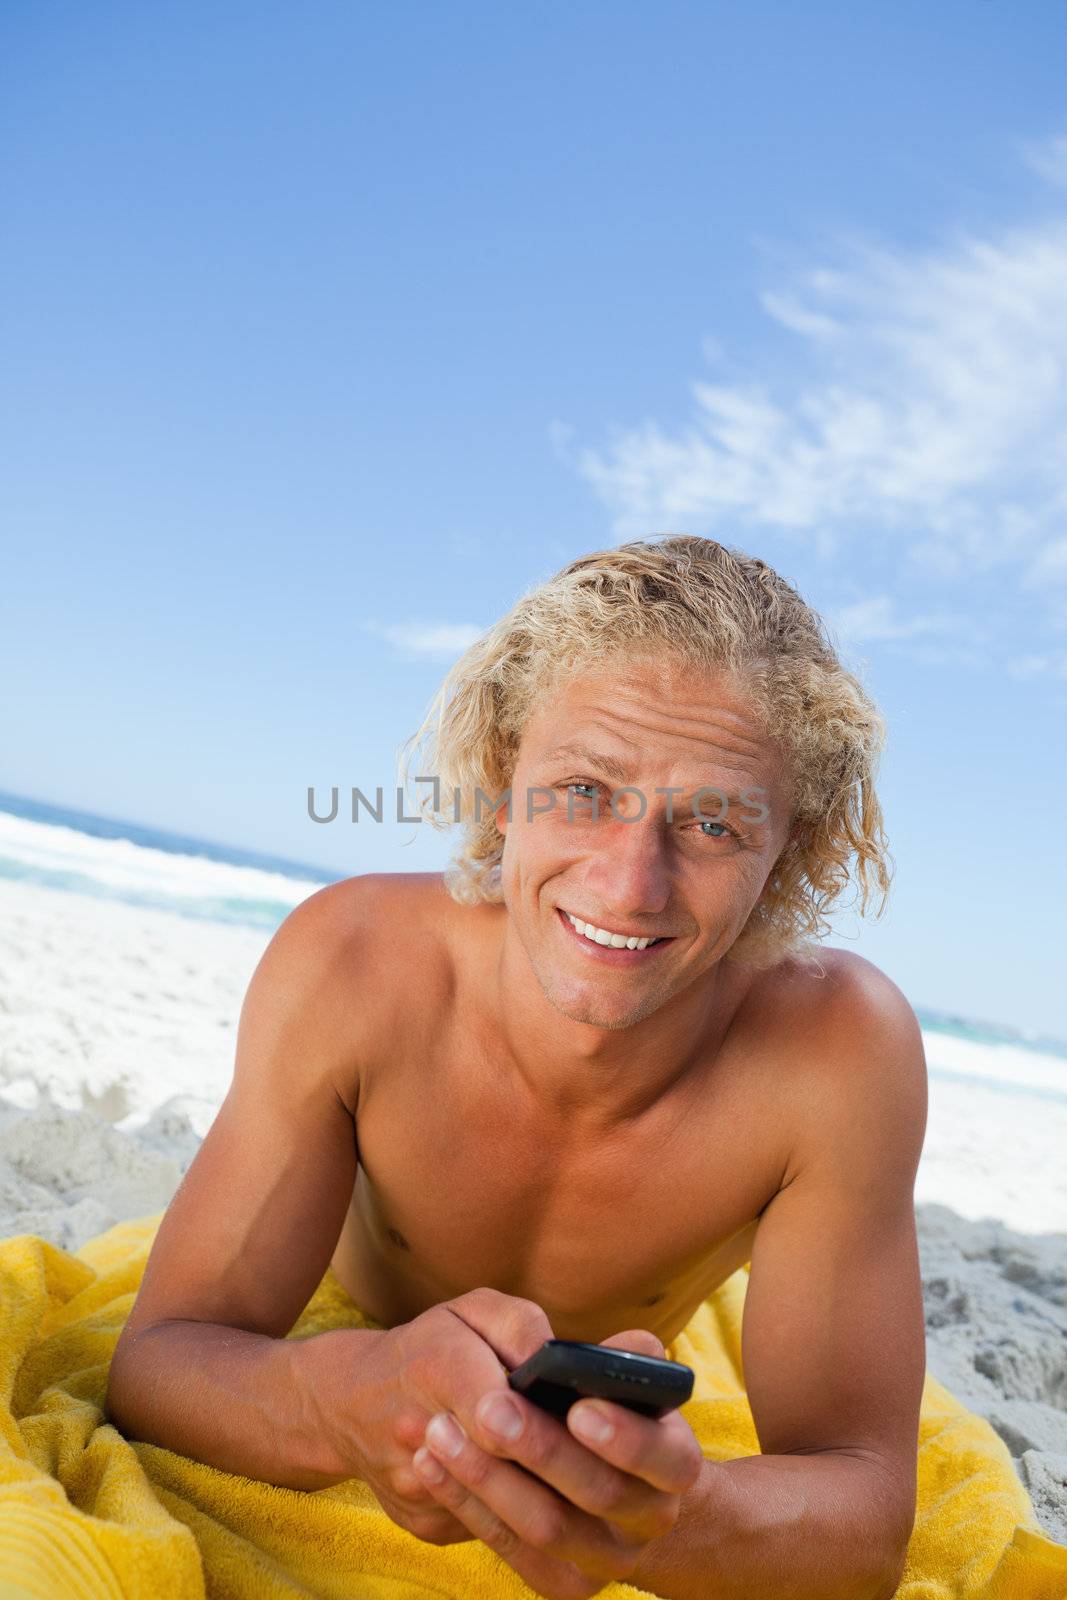 Smiling blonde man sending a text while sunbathing and lying on his beach towel